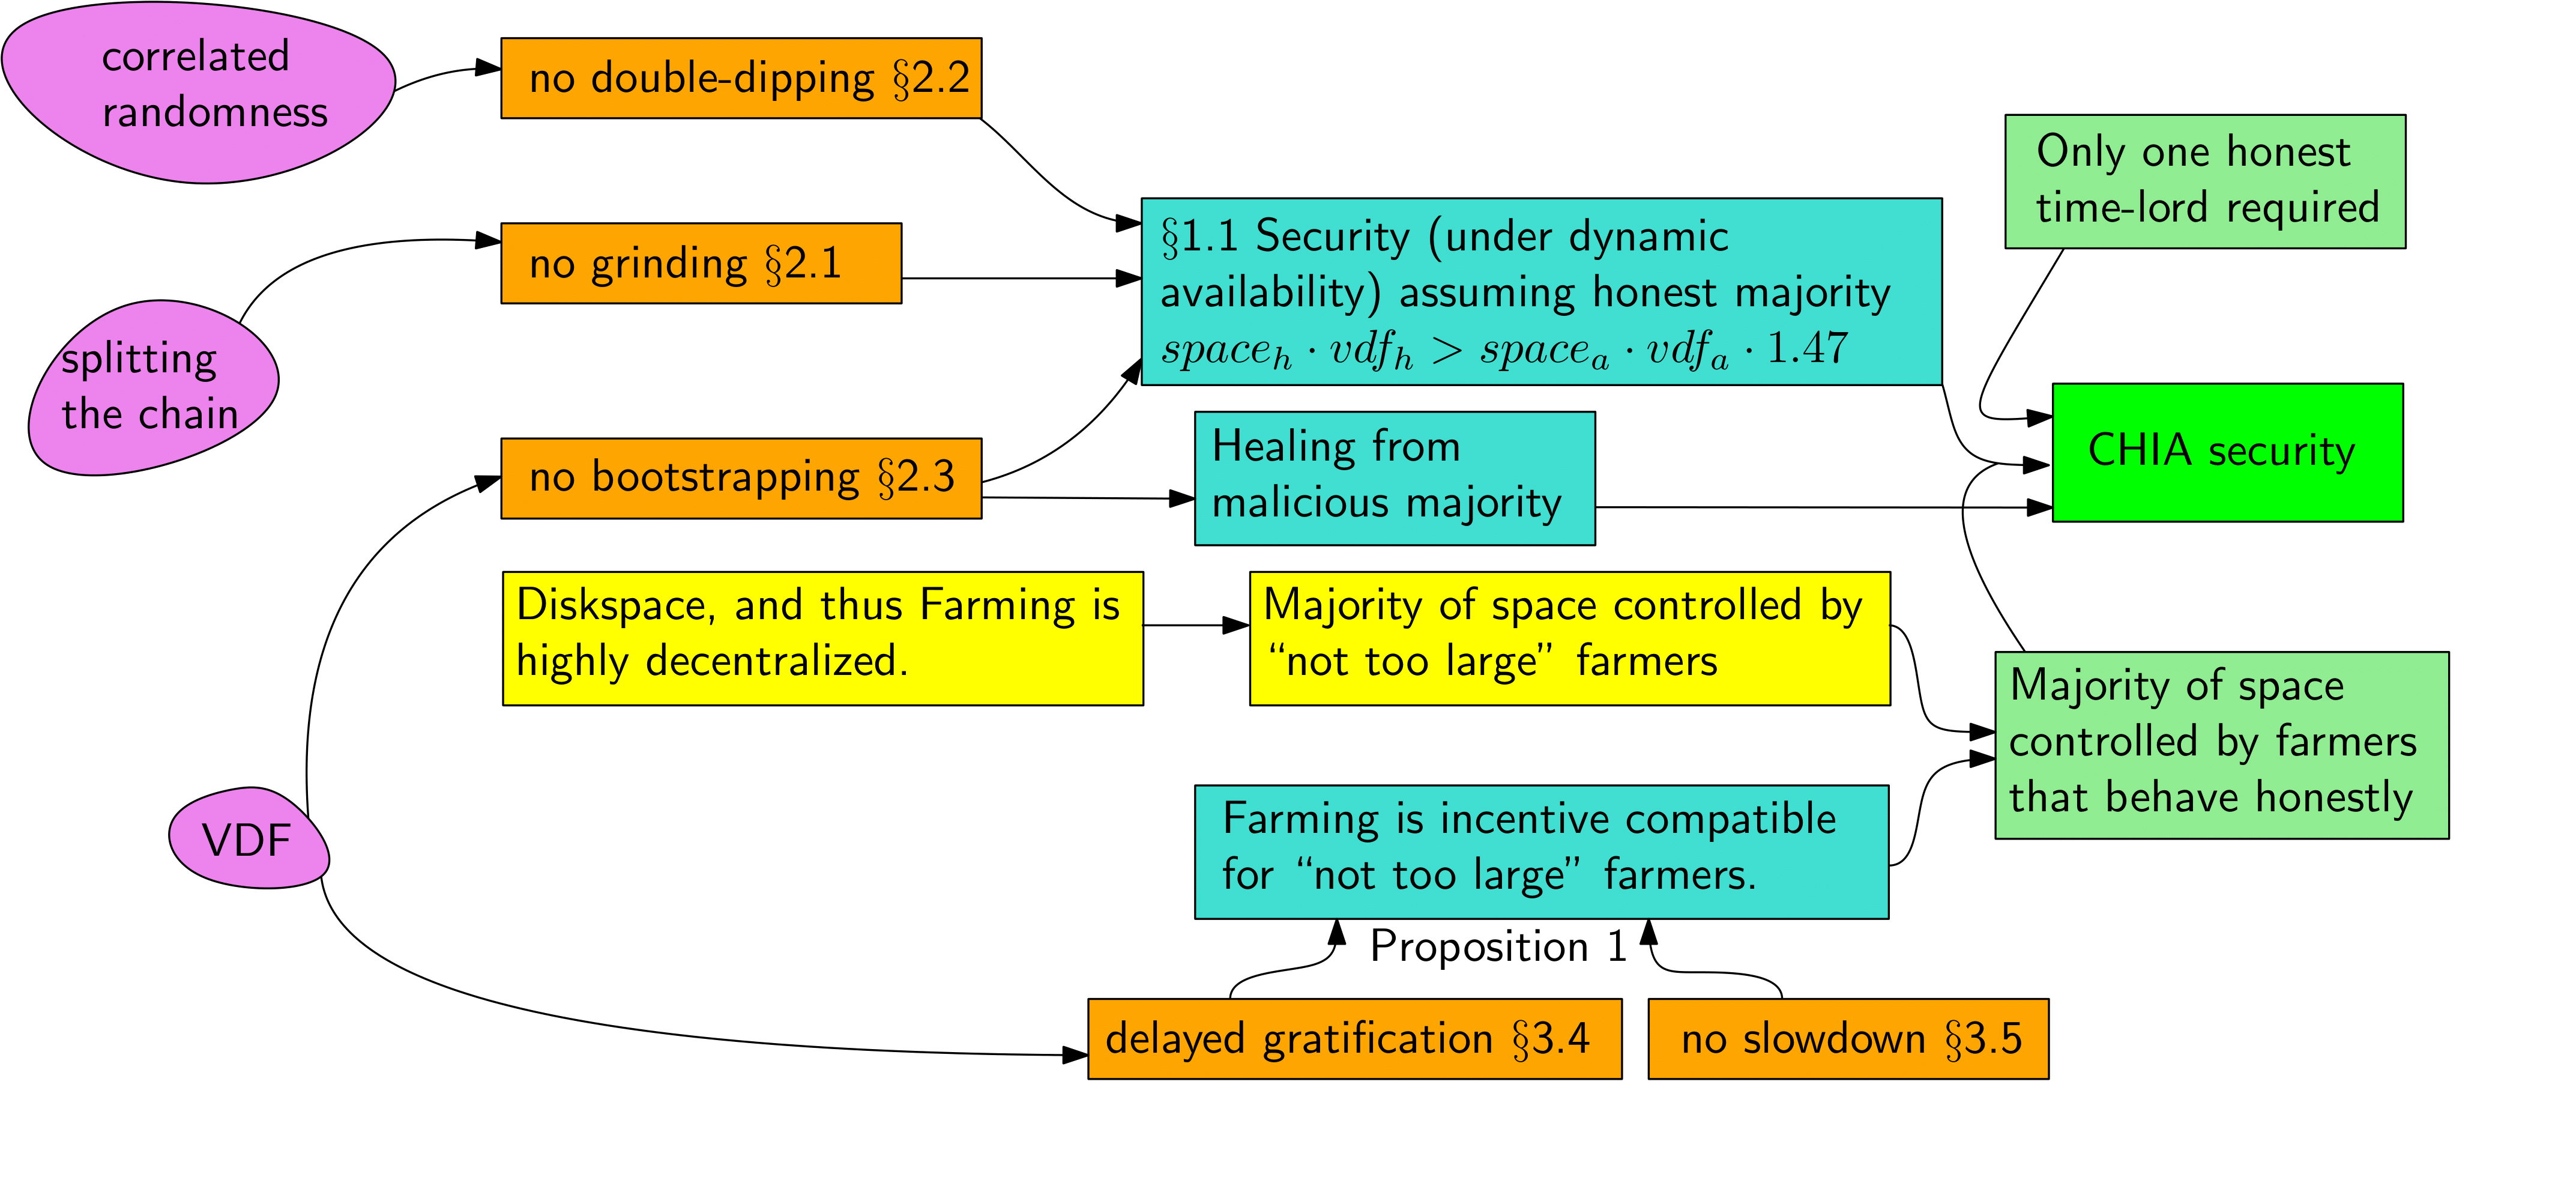 Diagram of Chia security and arguments